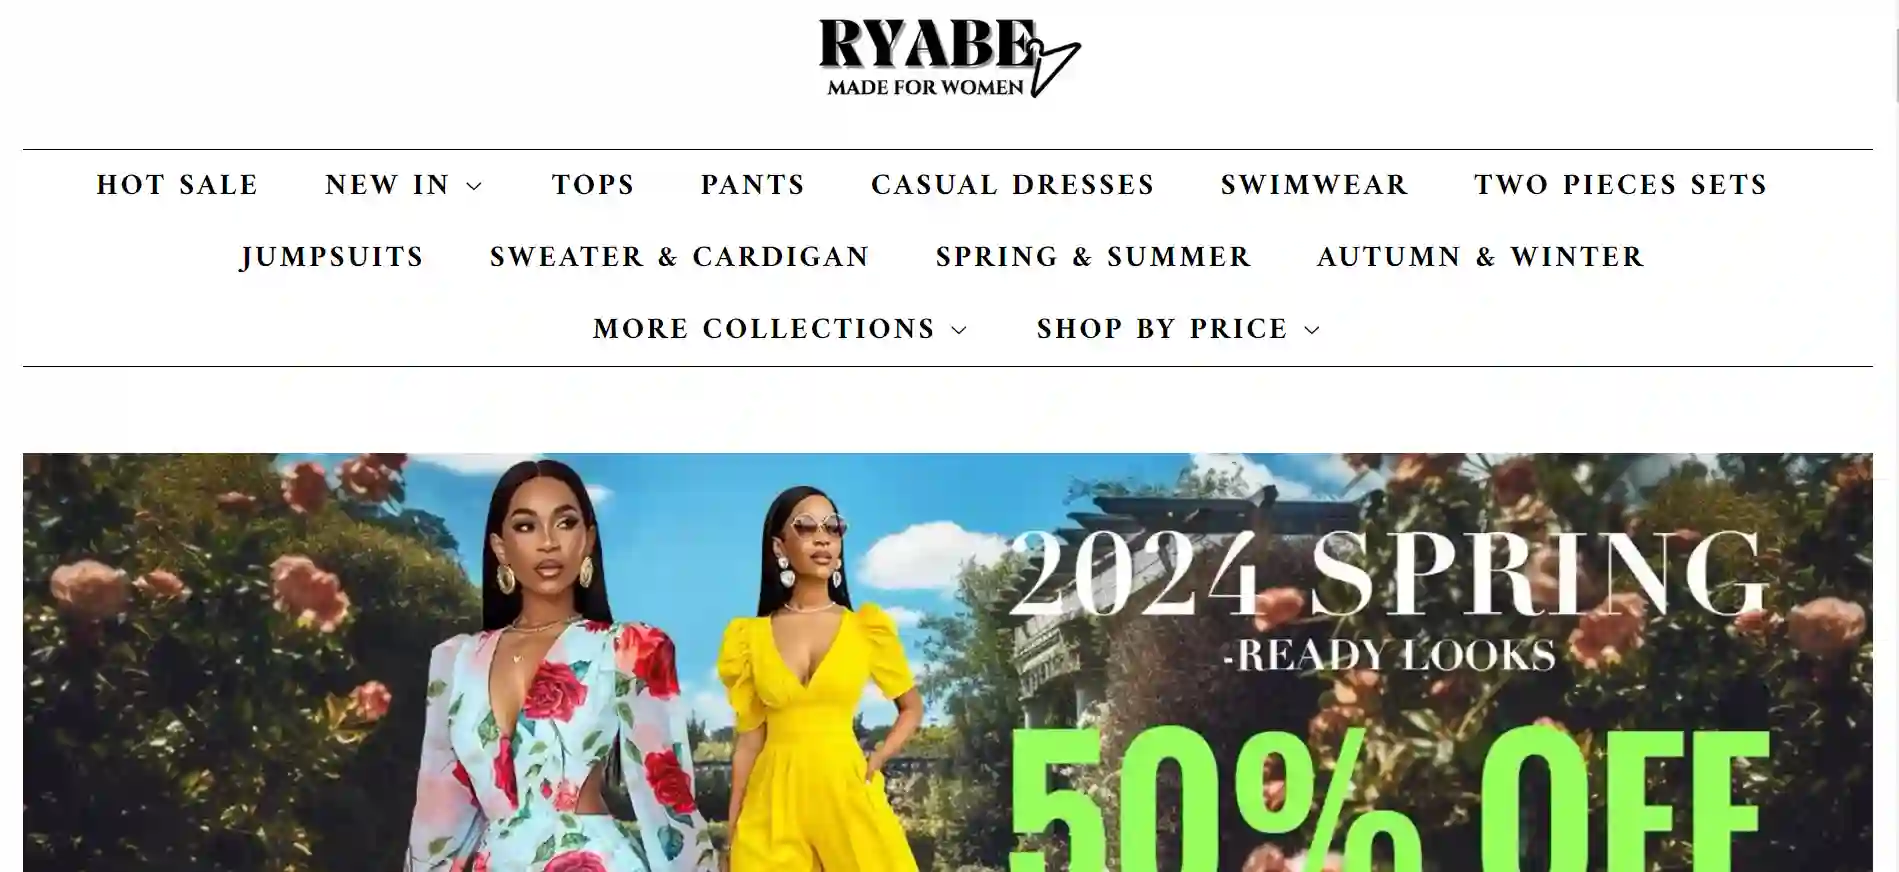 You are currently viewing Ryabe Clothes Review: Legit Or Scam?